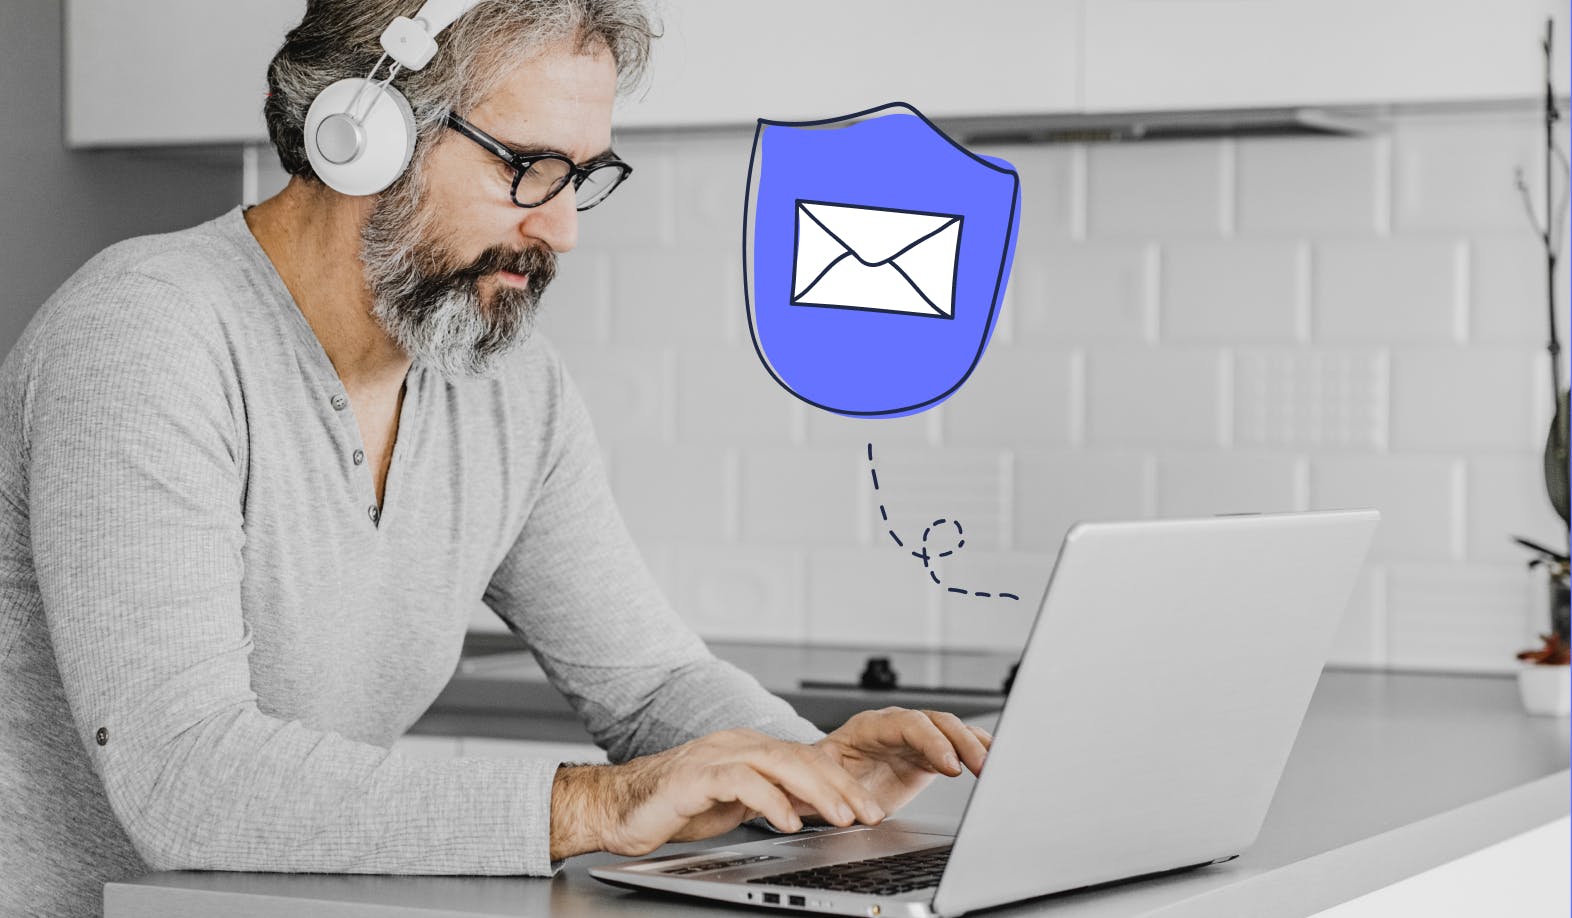 blogpost-image of a man looking at his laptop with an illustrated security shield with an email envelope inside